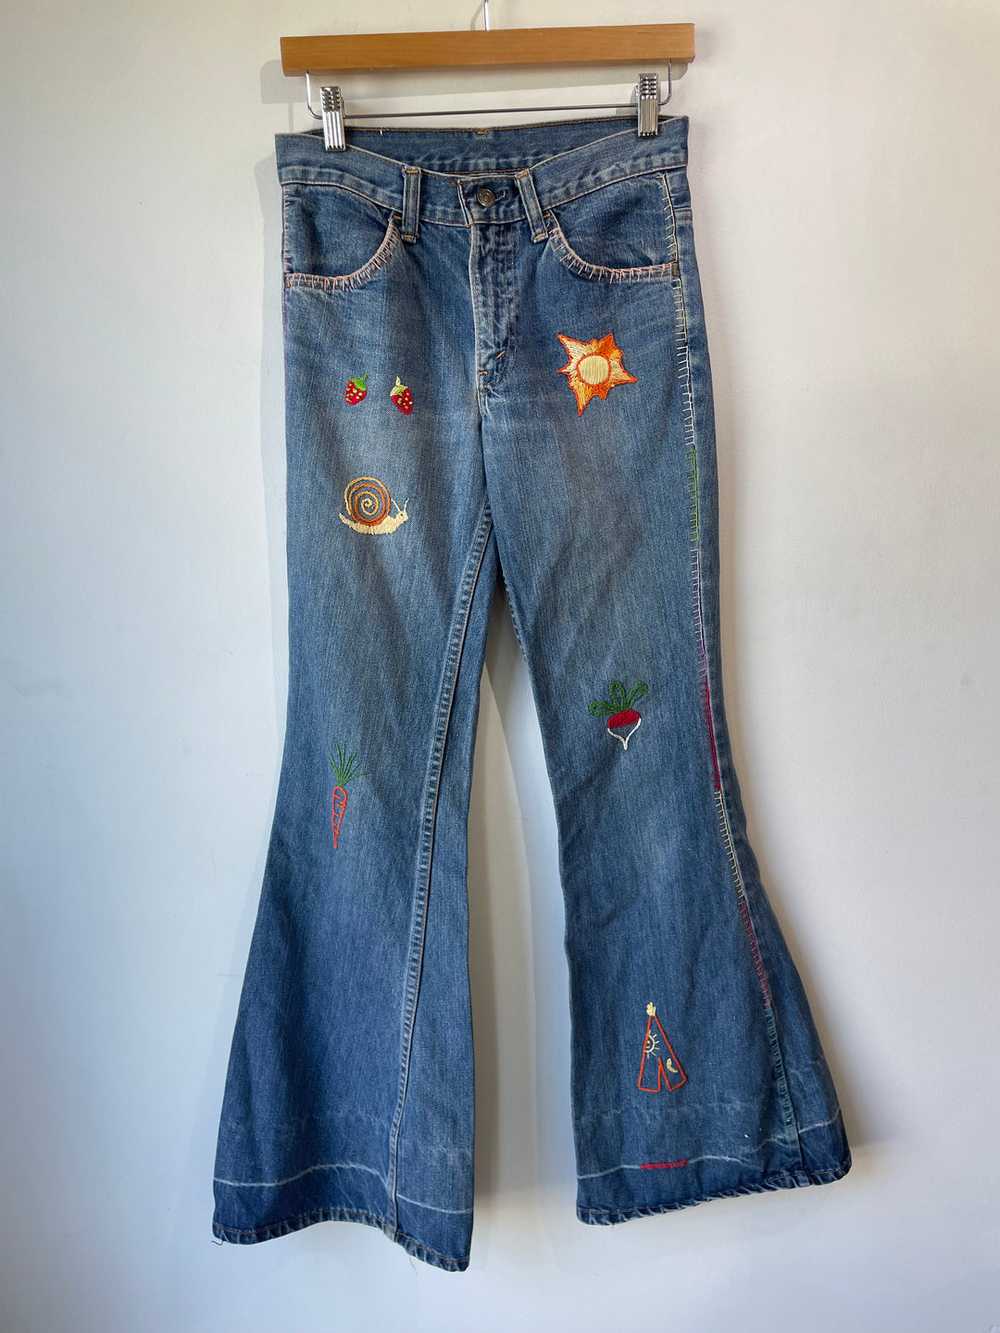 Vintage Levi's High-Waisted Bell Bottoms Jeans - image 1